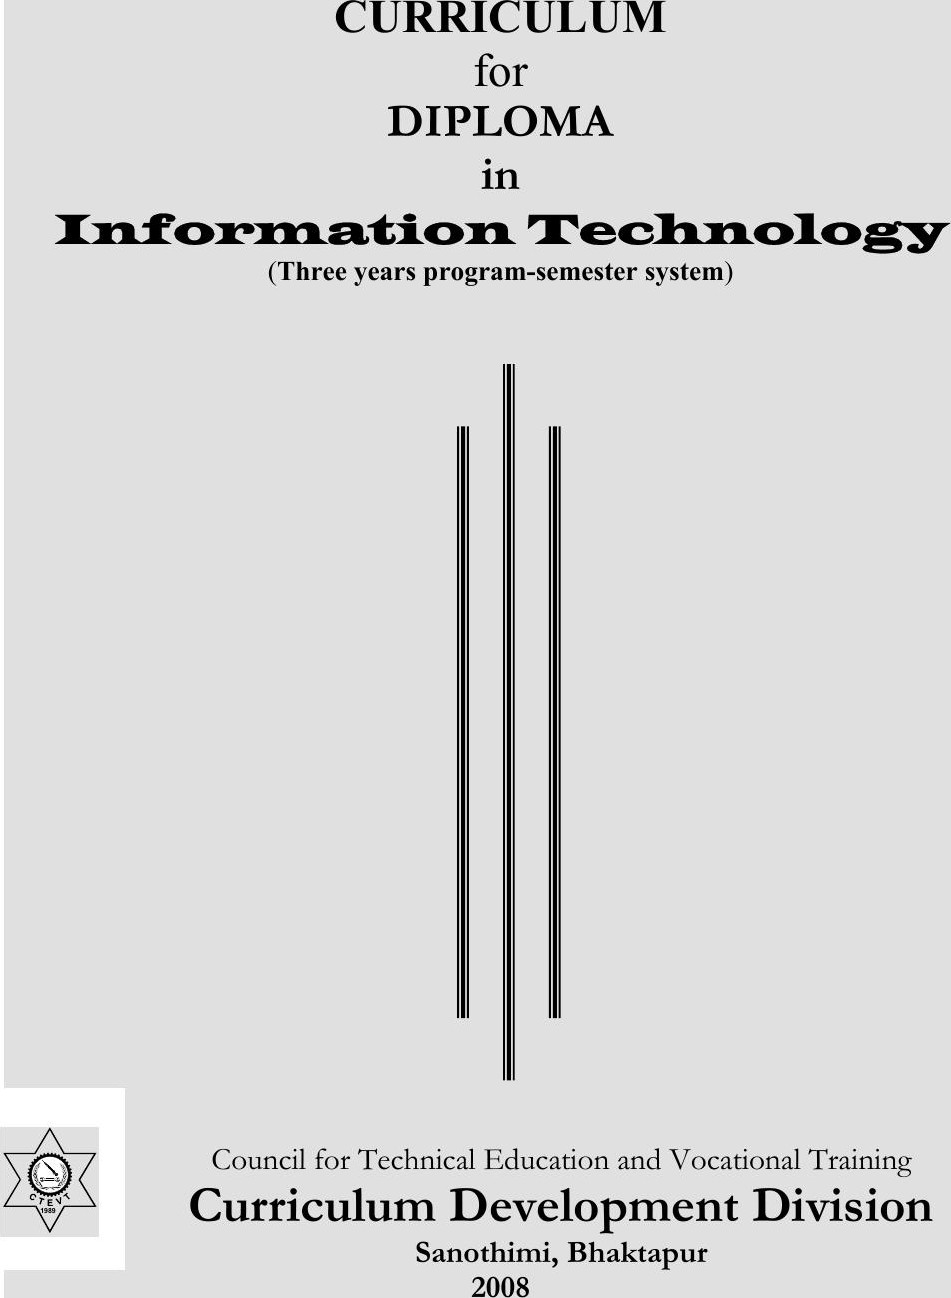 Diploma in Information Technology, 2008